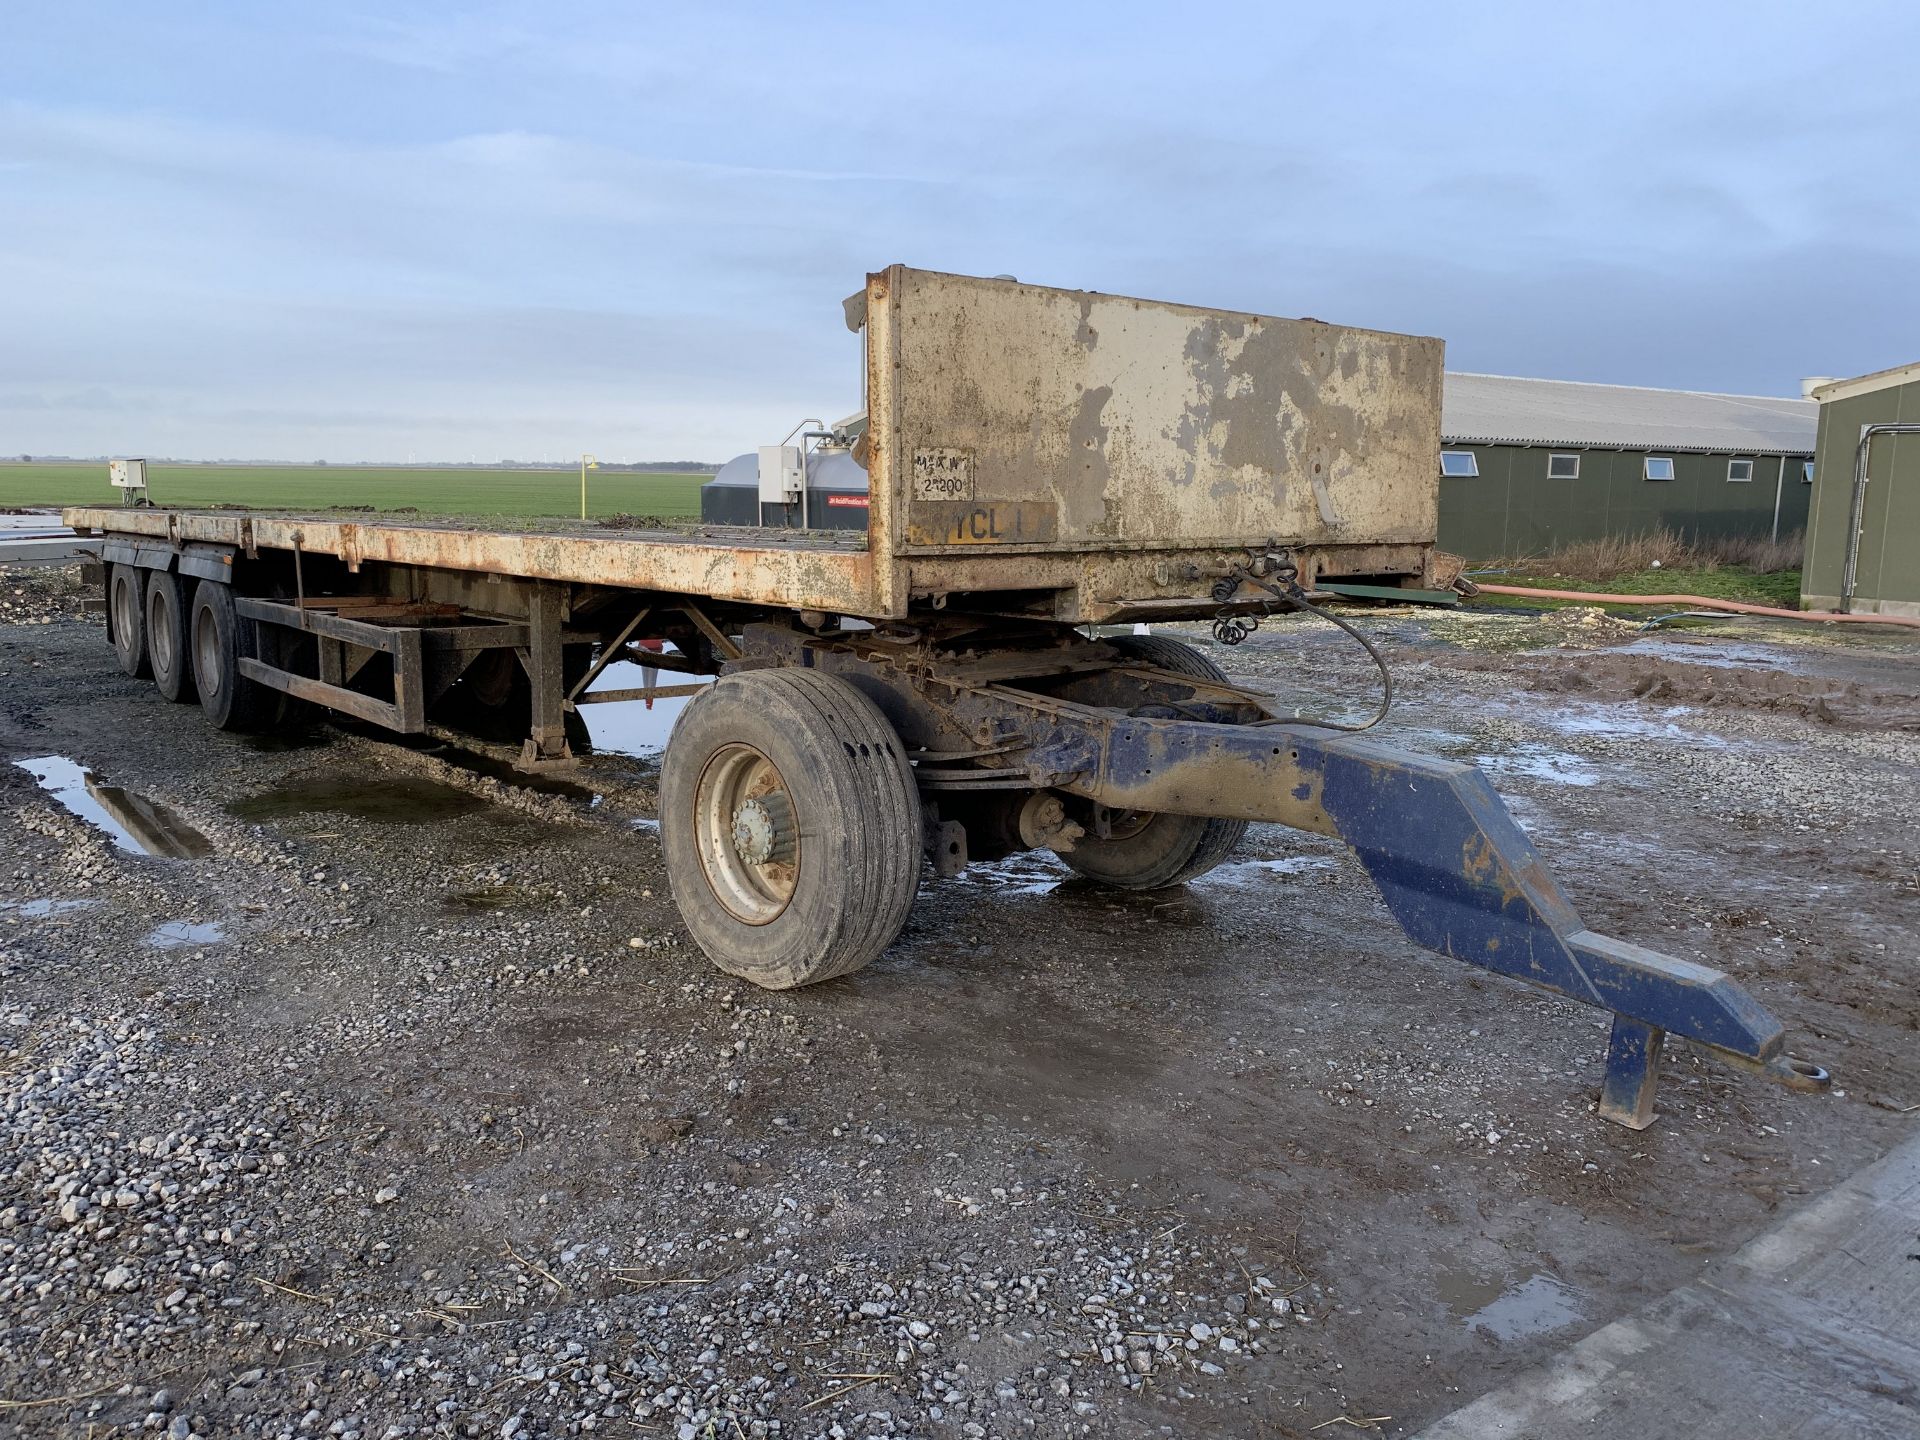 40' triaxle artic bale trailer on dolly